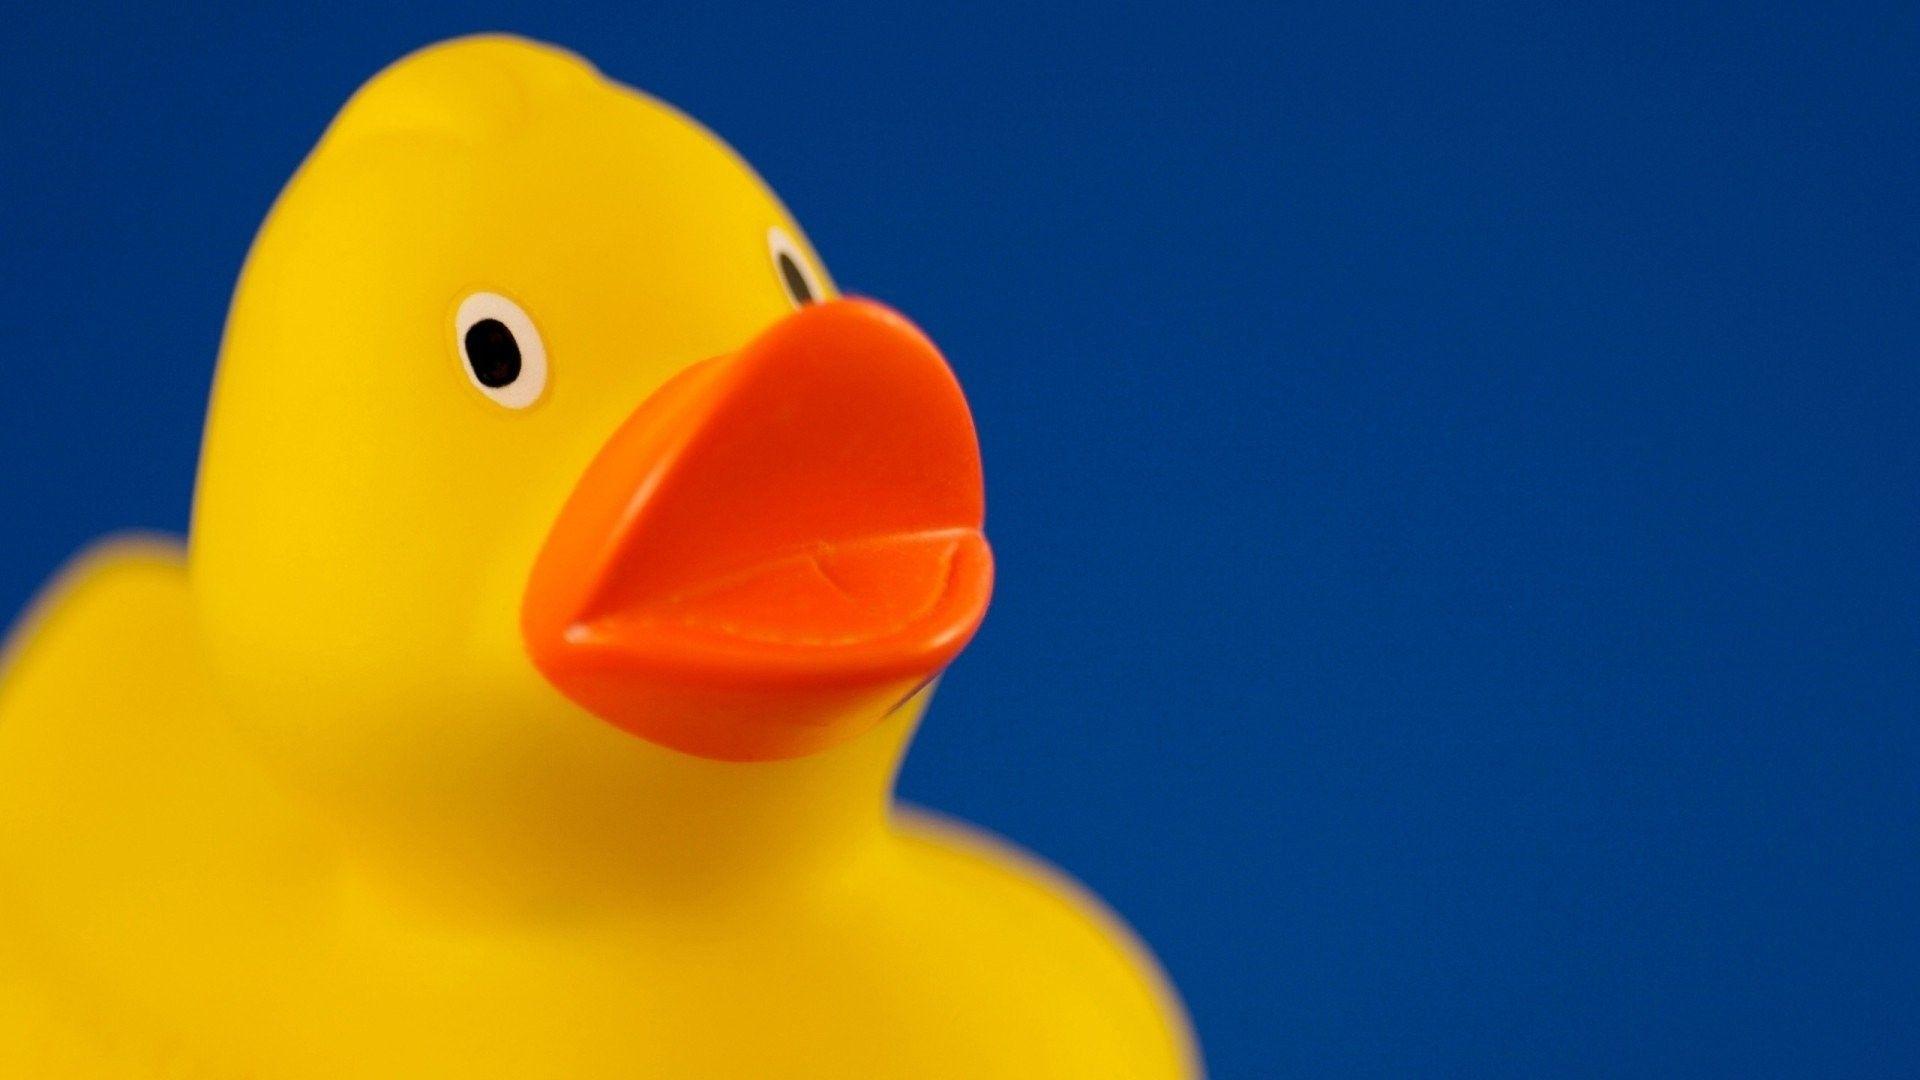 60 Free Rubber Duckies  Rubber Duck Images  Pixabay